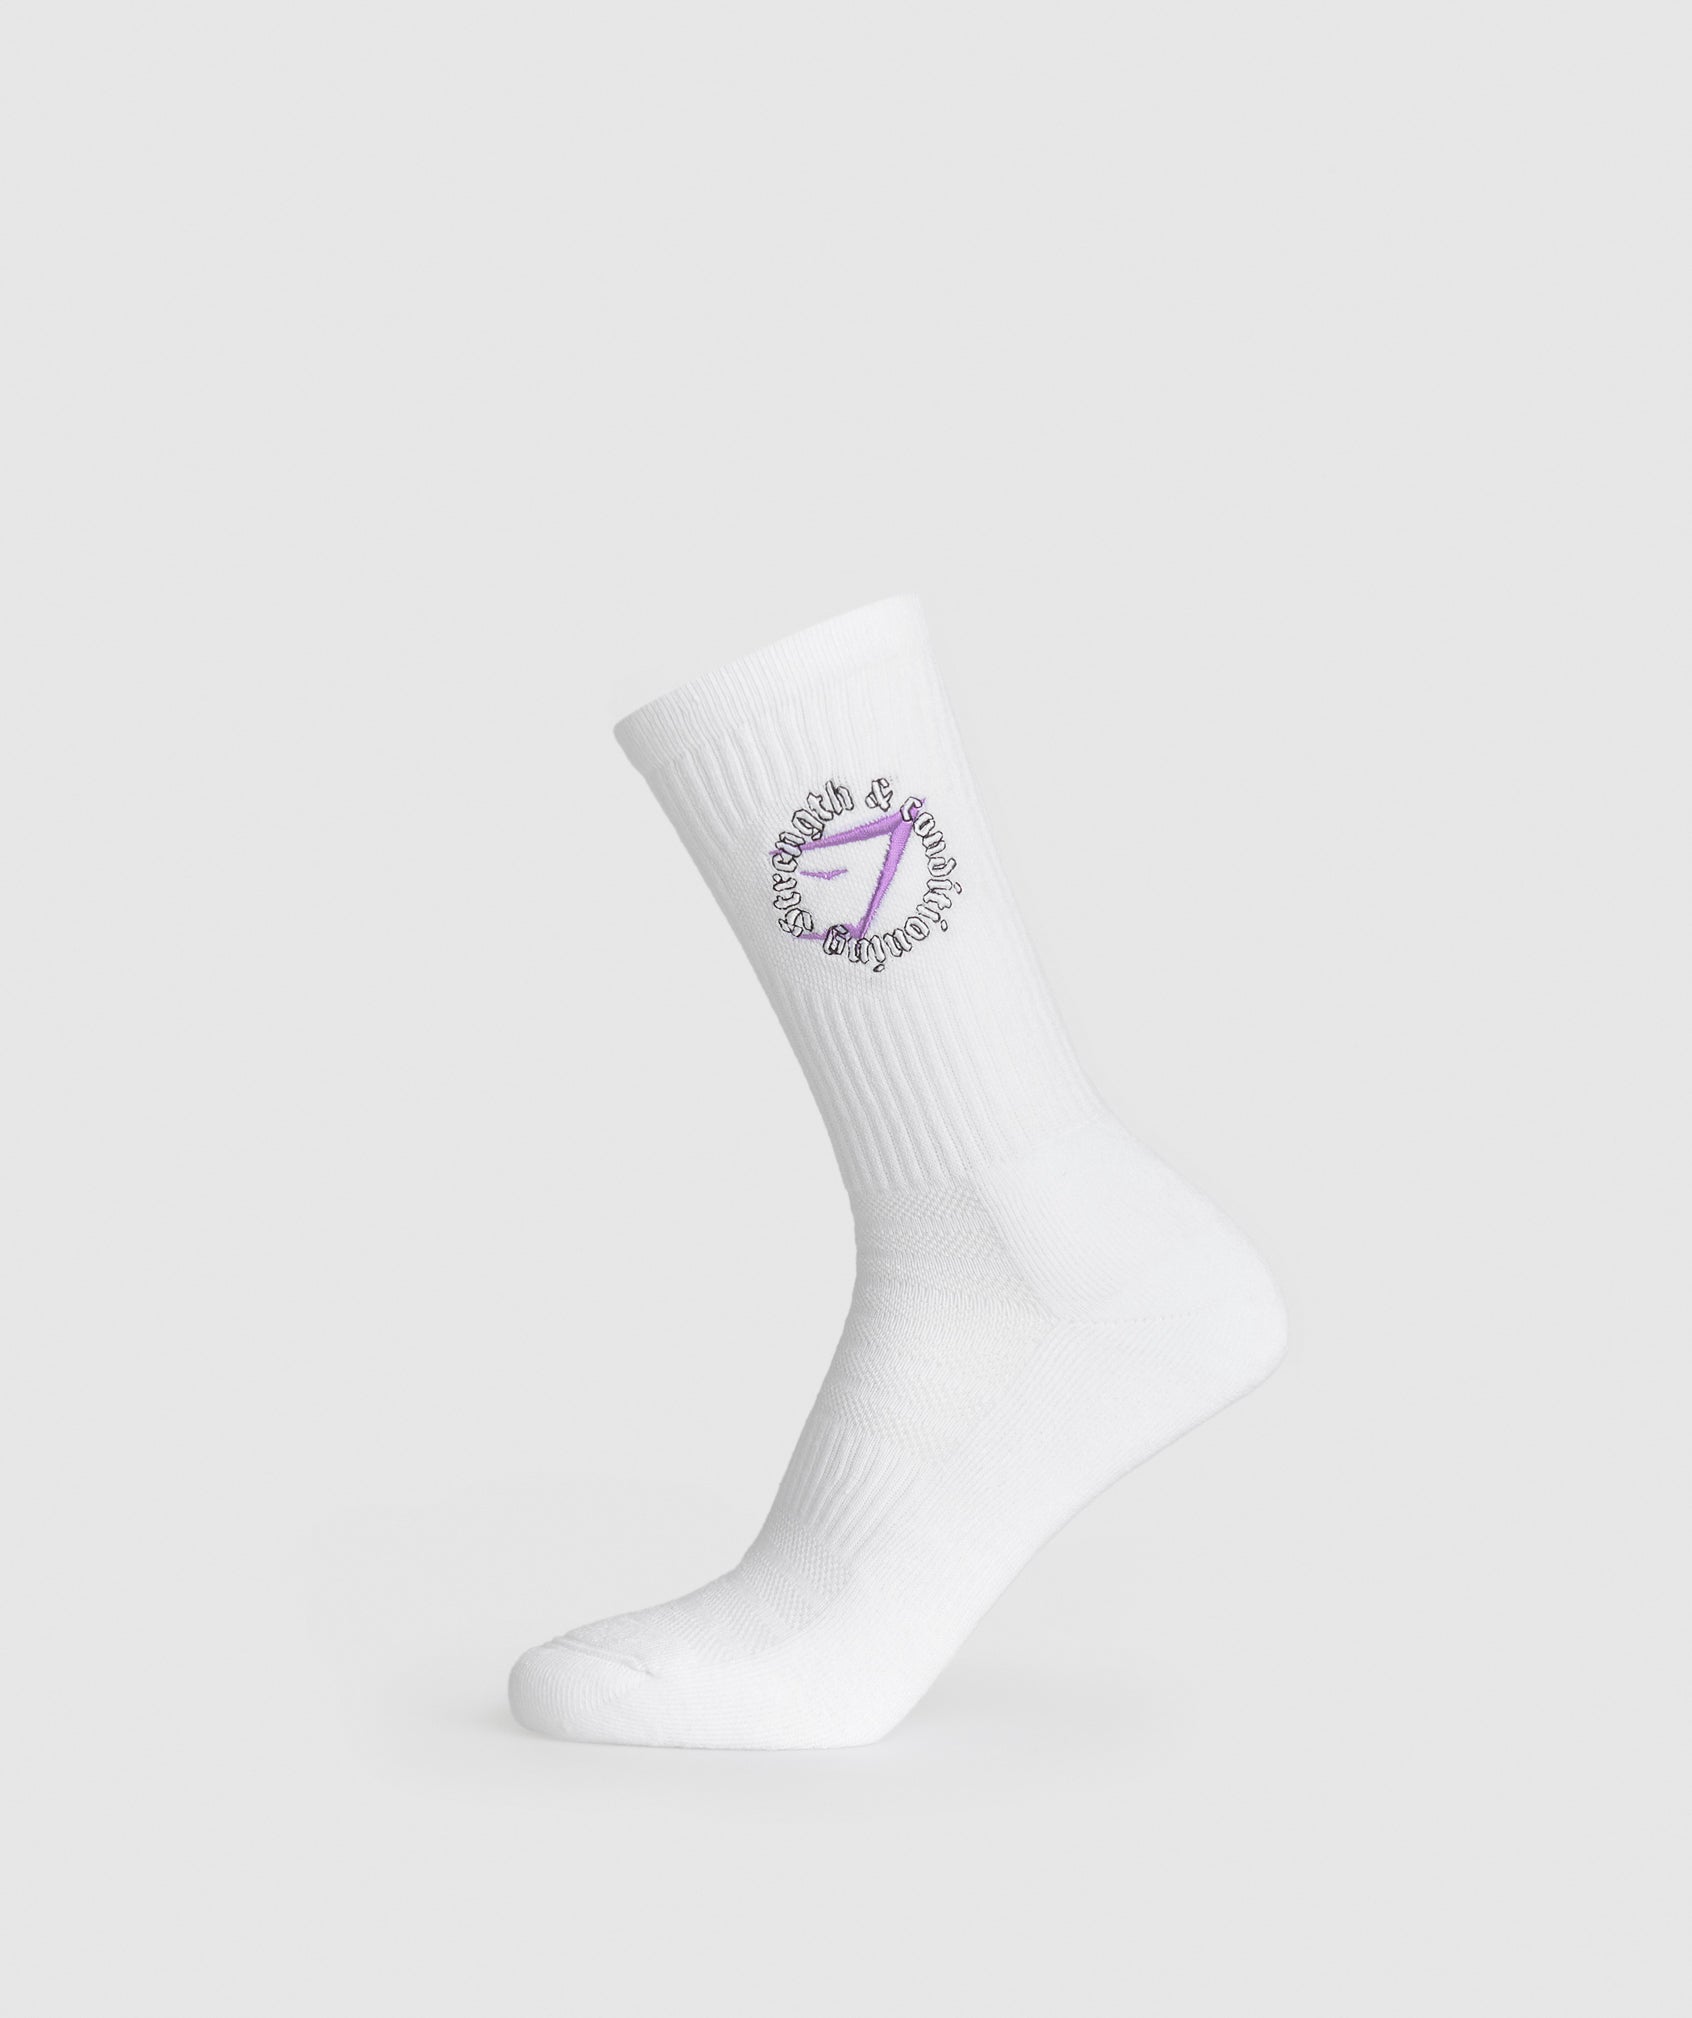 Strength and Conditioning Crew Socks in White - view 1